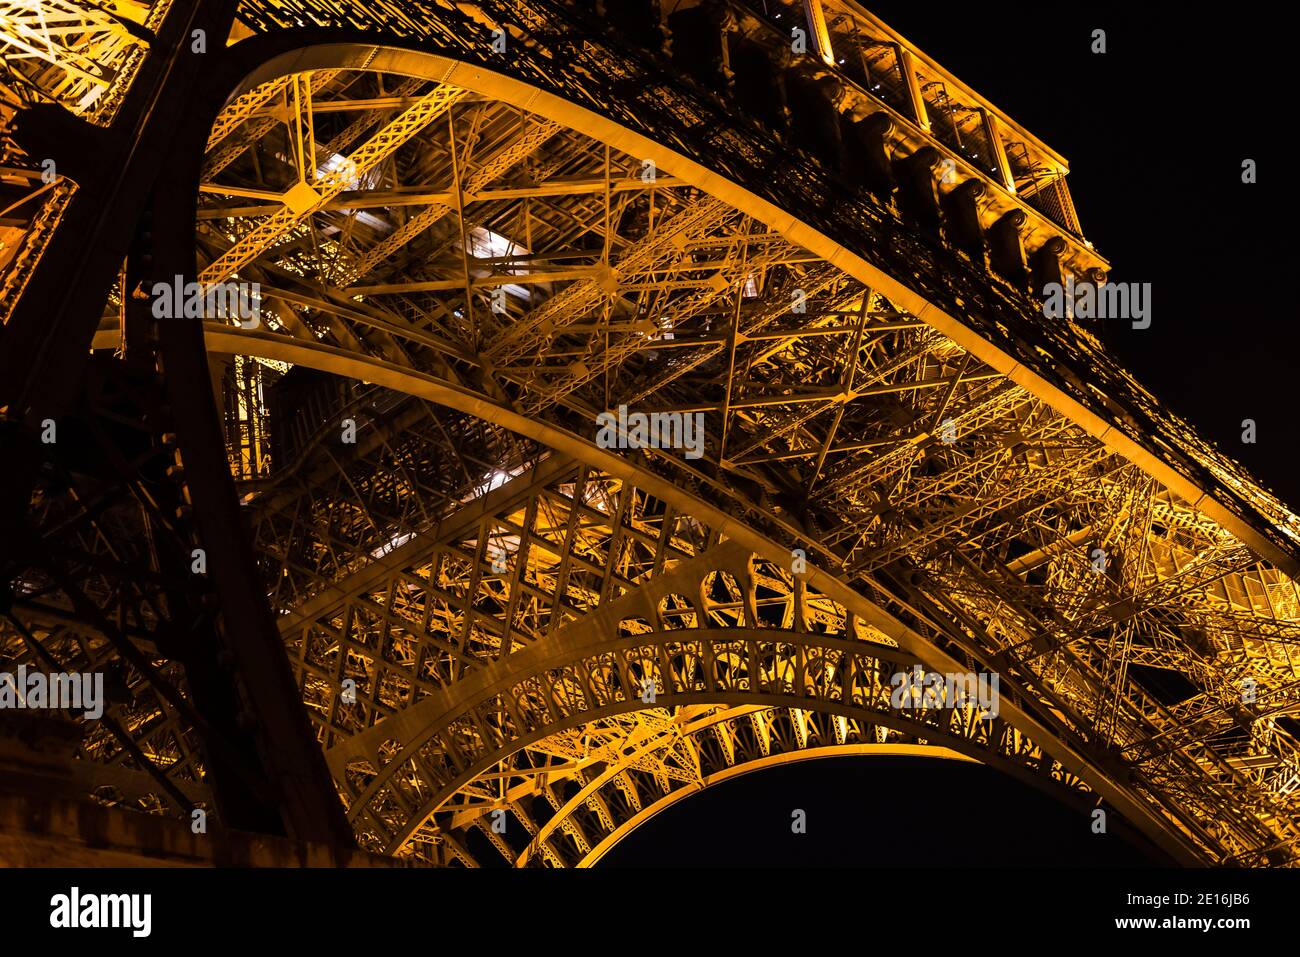 Iron web under the Eiffel Tower at night in Paris, France Stock Photo